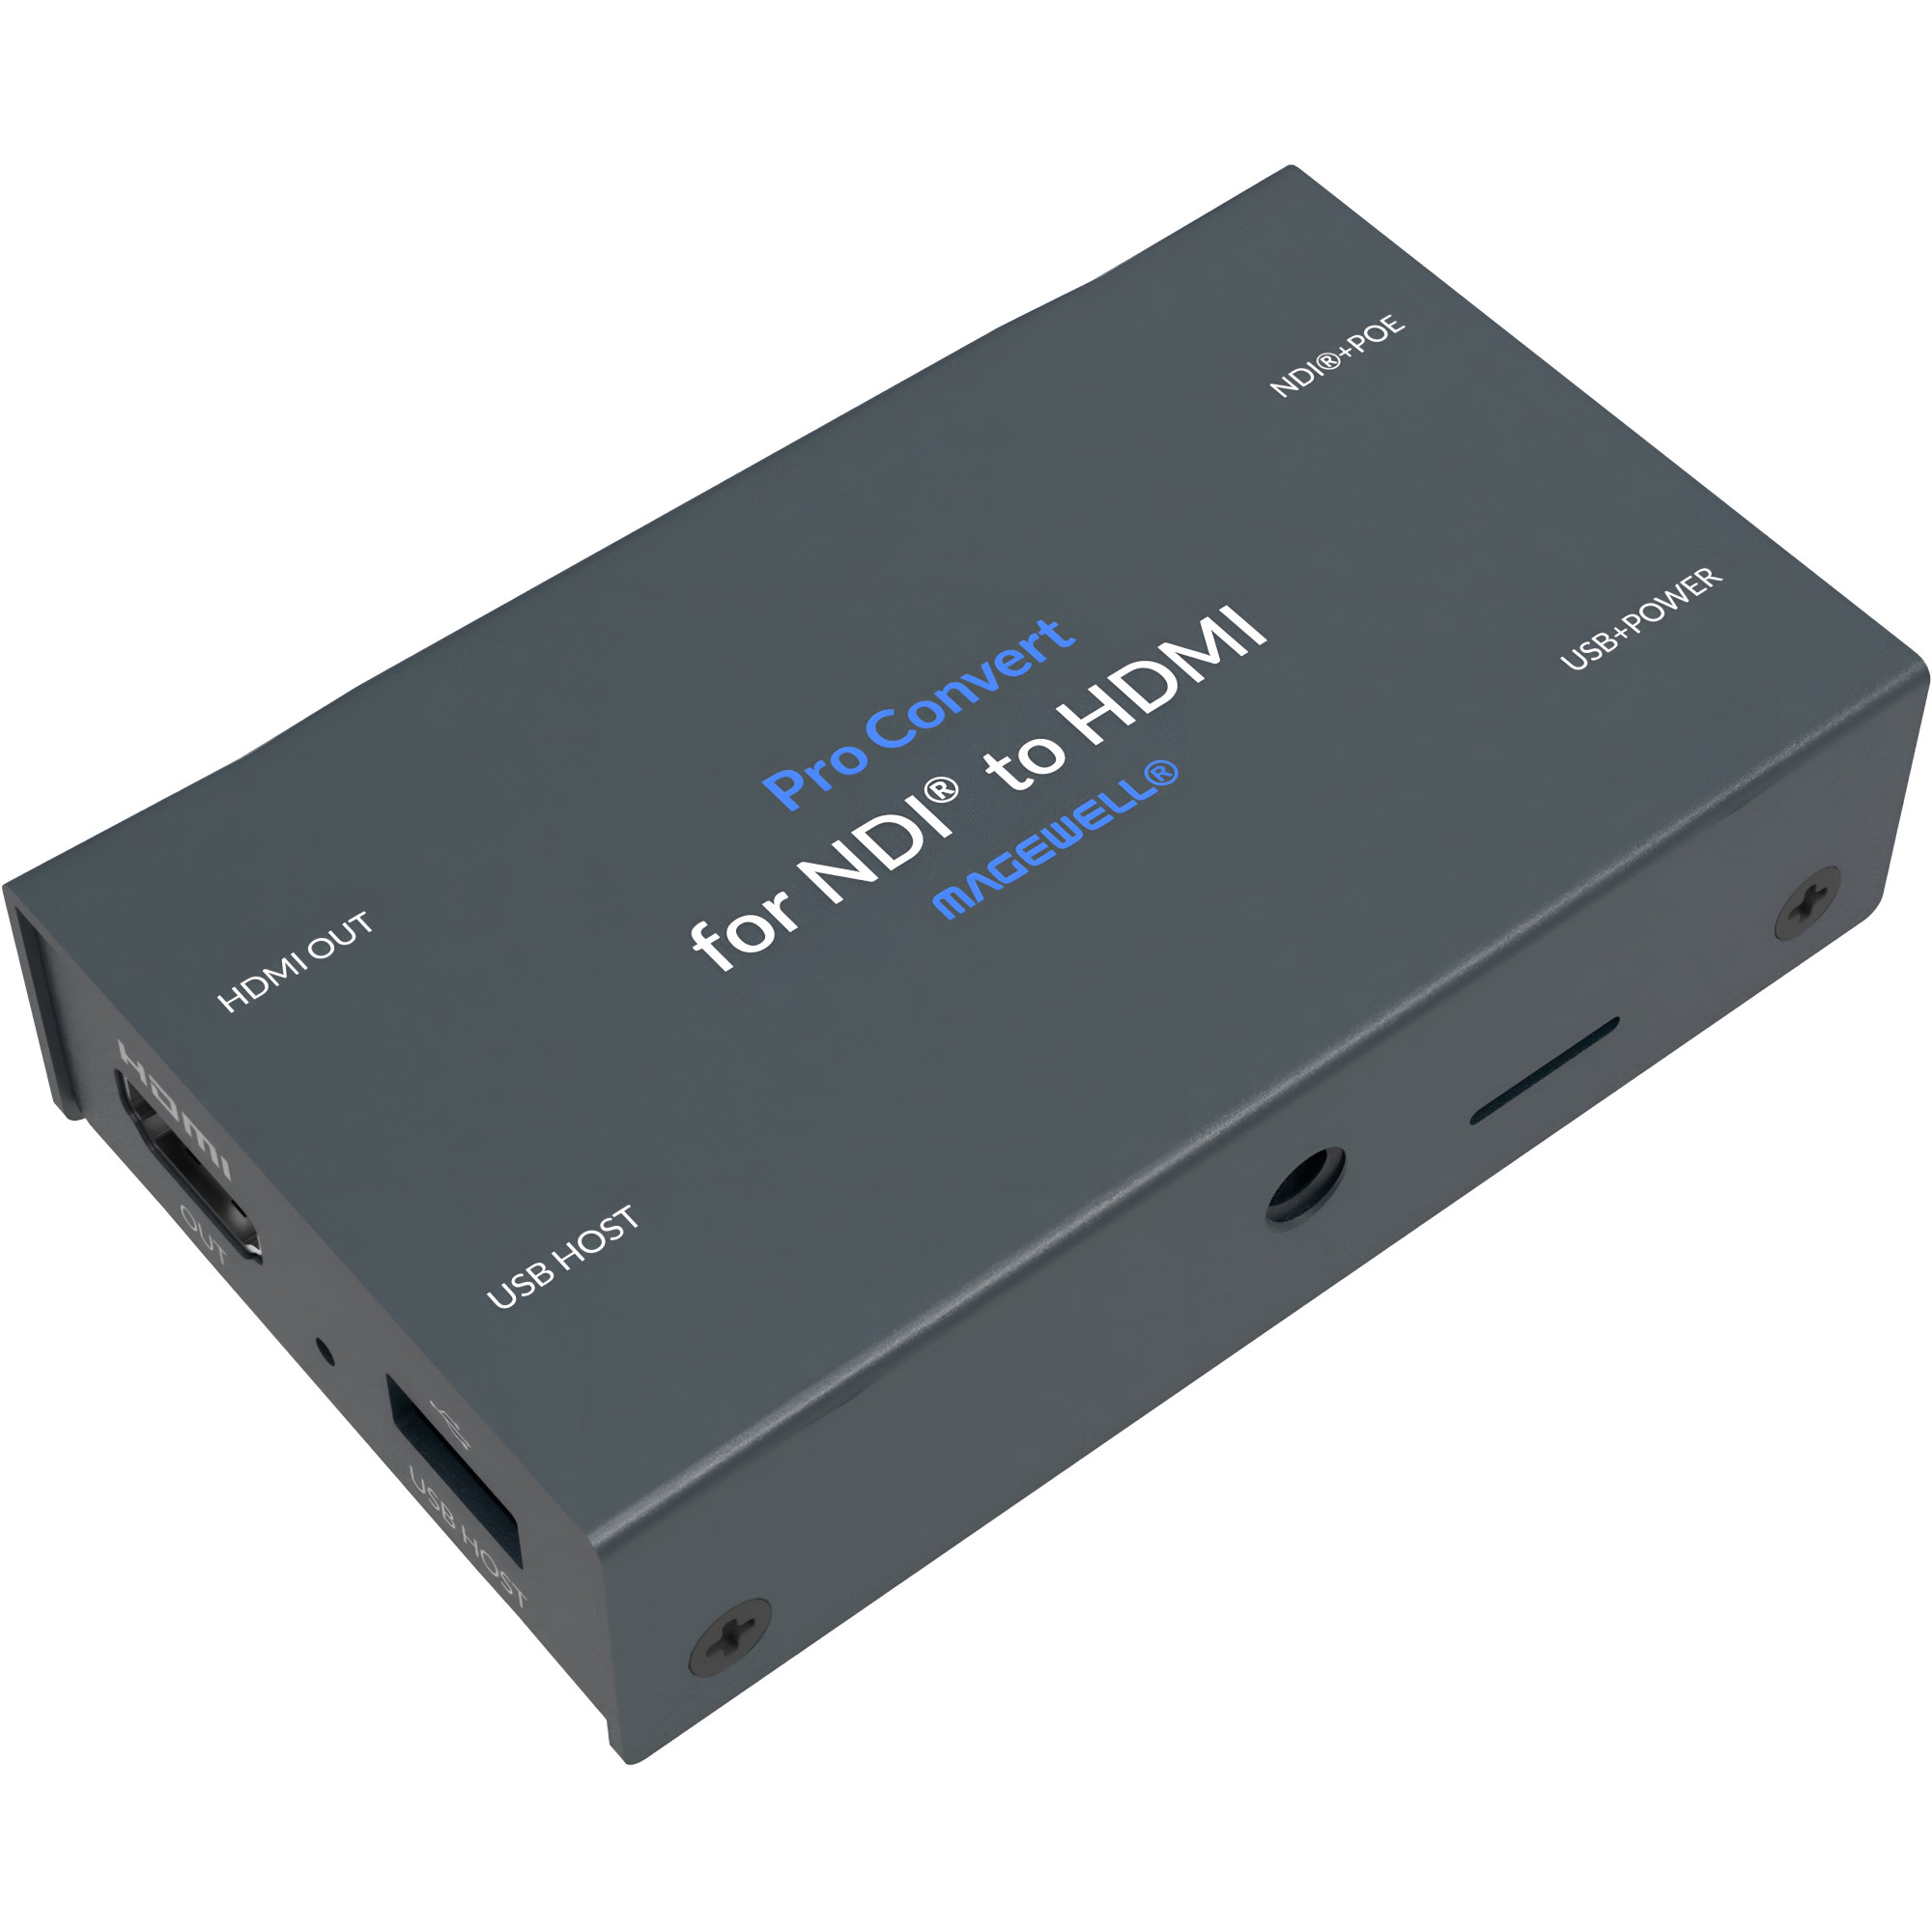 Magewell Pro Convert for NDI® to HDMI (64102) | Décodeur, Convertisseur NDI vers HDMI